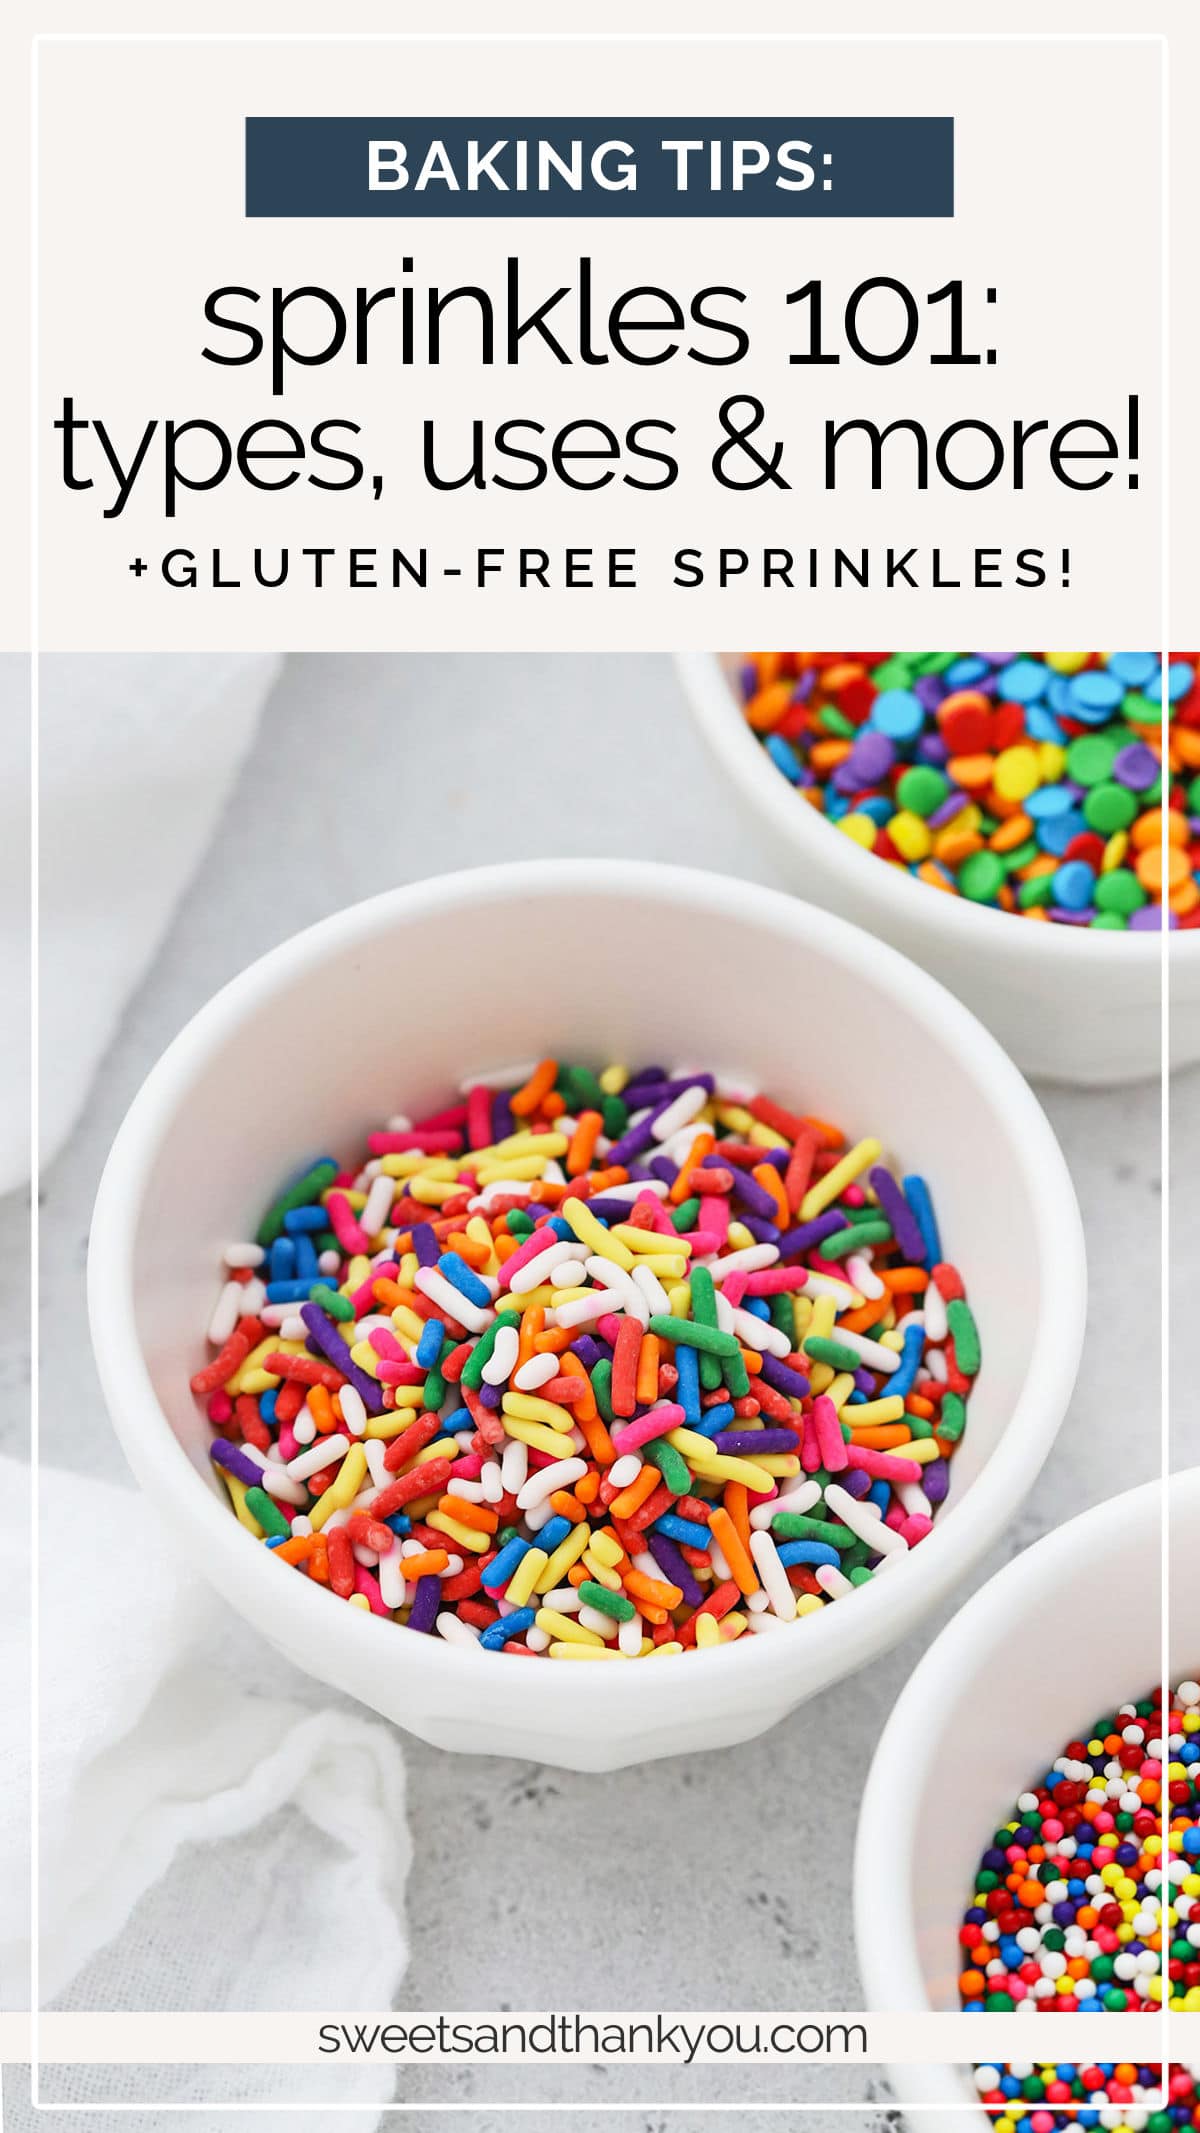 Sprinkles 101 - I'm taking you to sprinkle school today! We'll learn what the different kinds of sprinkles are, how to use them & more! // Types of Sprinkles // Funfetti Sprinkles // Cake Decorating Tips // Cookie Decorating Tips // Gluten Free Baking // Baking Tips #bakingtips #cakedecorating #cakeideas #cookiedecorating #glutenfreebaking #sprinkles